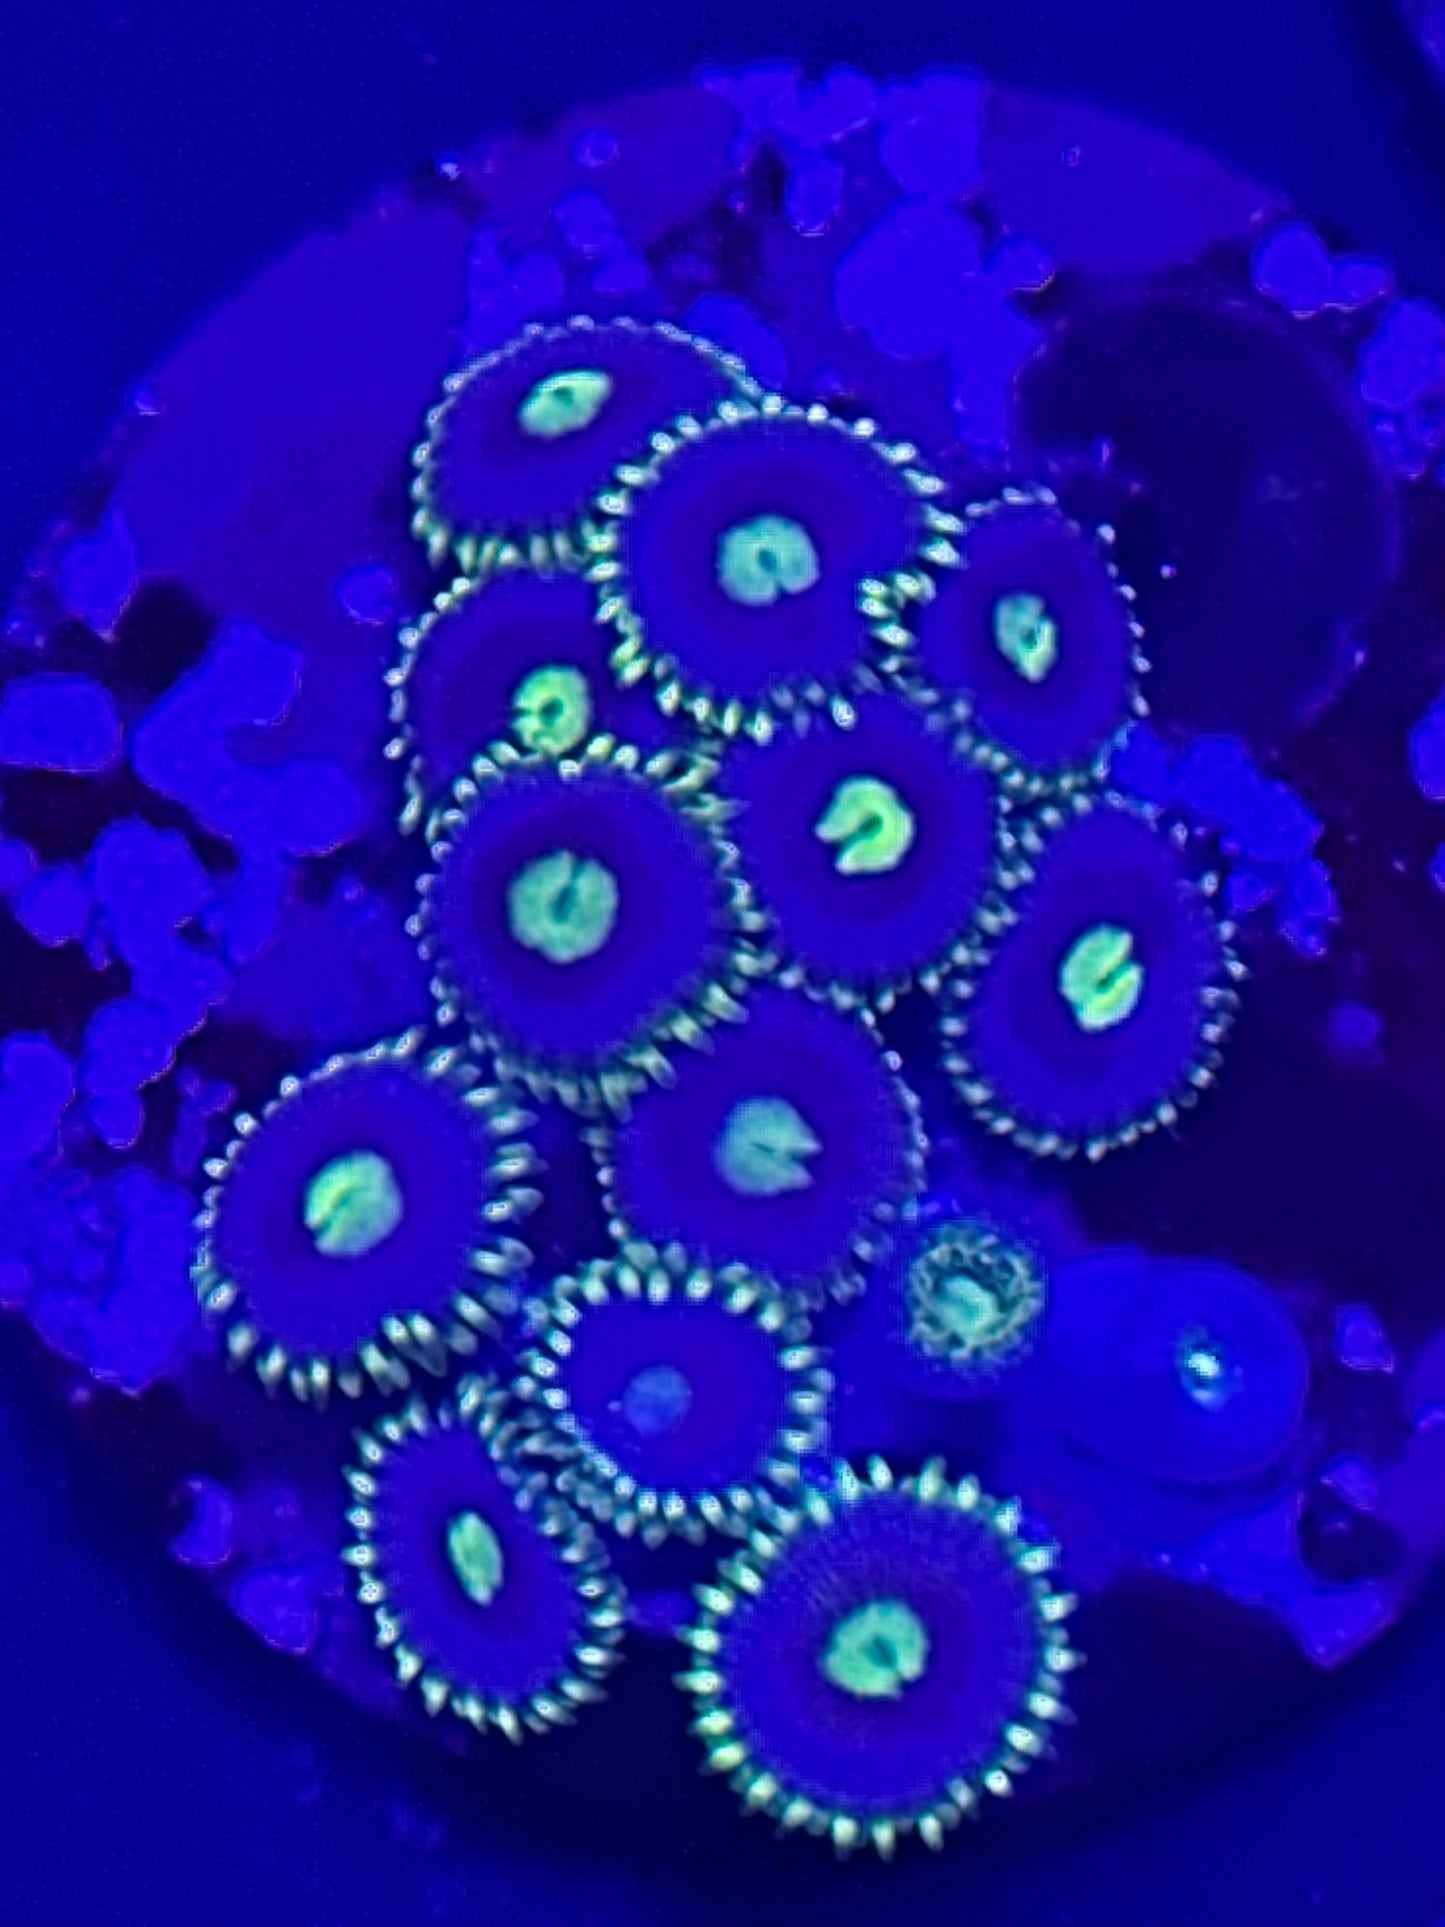 Lime Green and Blue Zoa